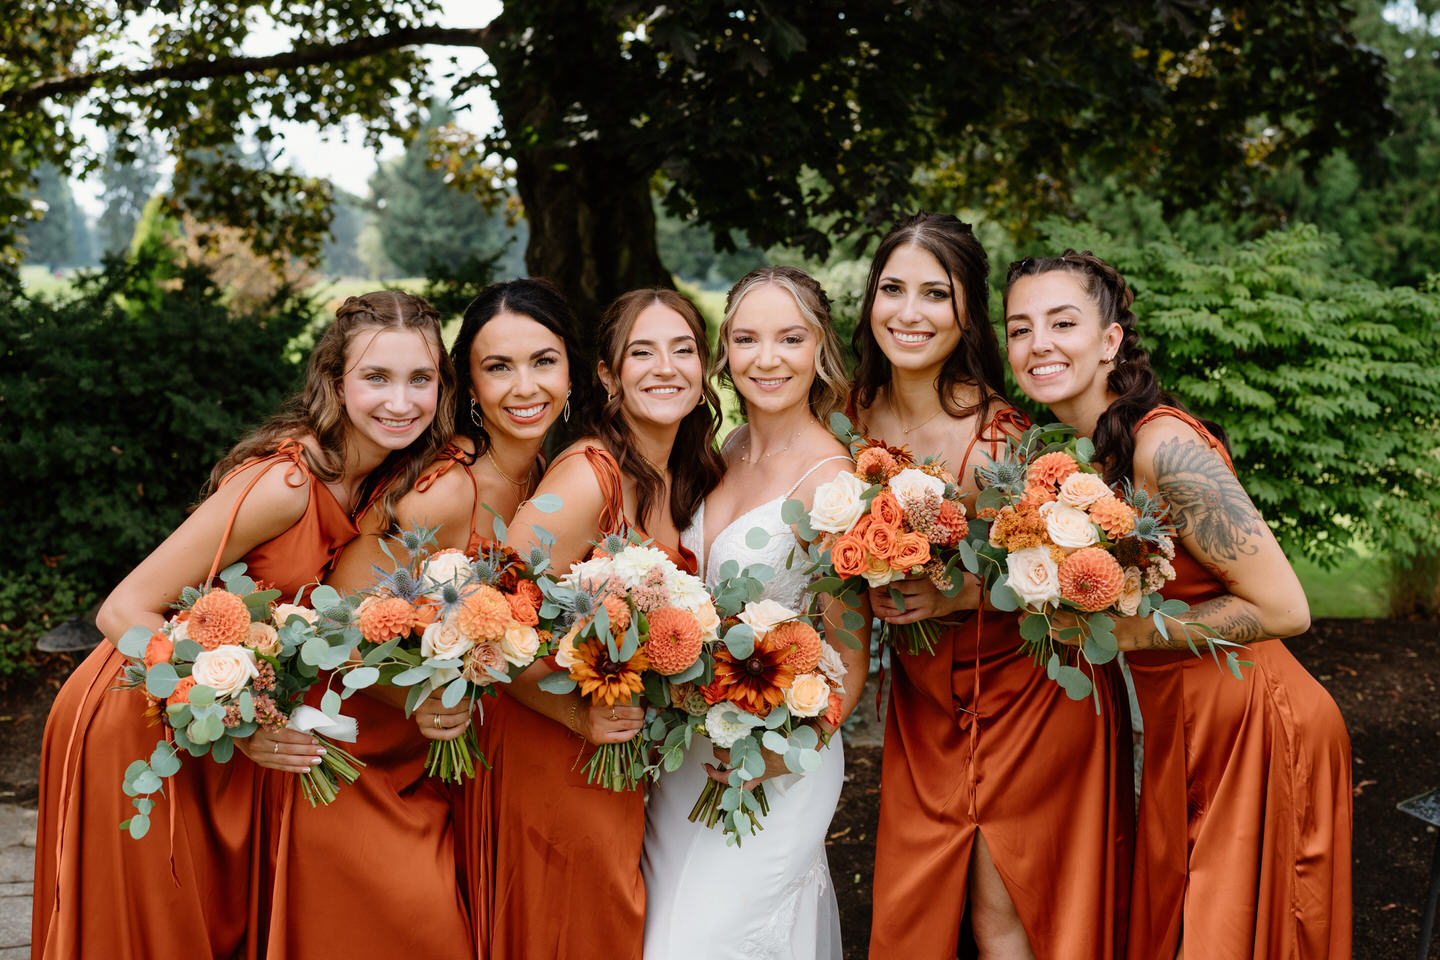 Bride and bridesmaids posing with bouquets in the garden at shadow hills country club